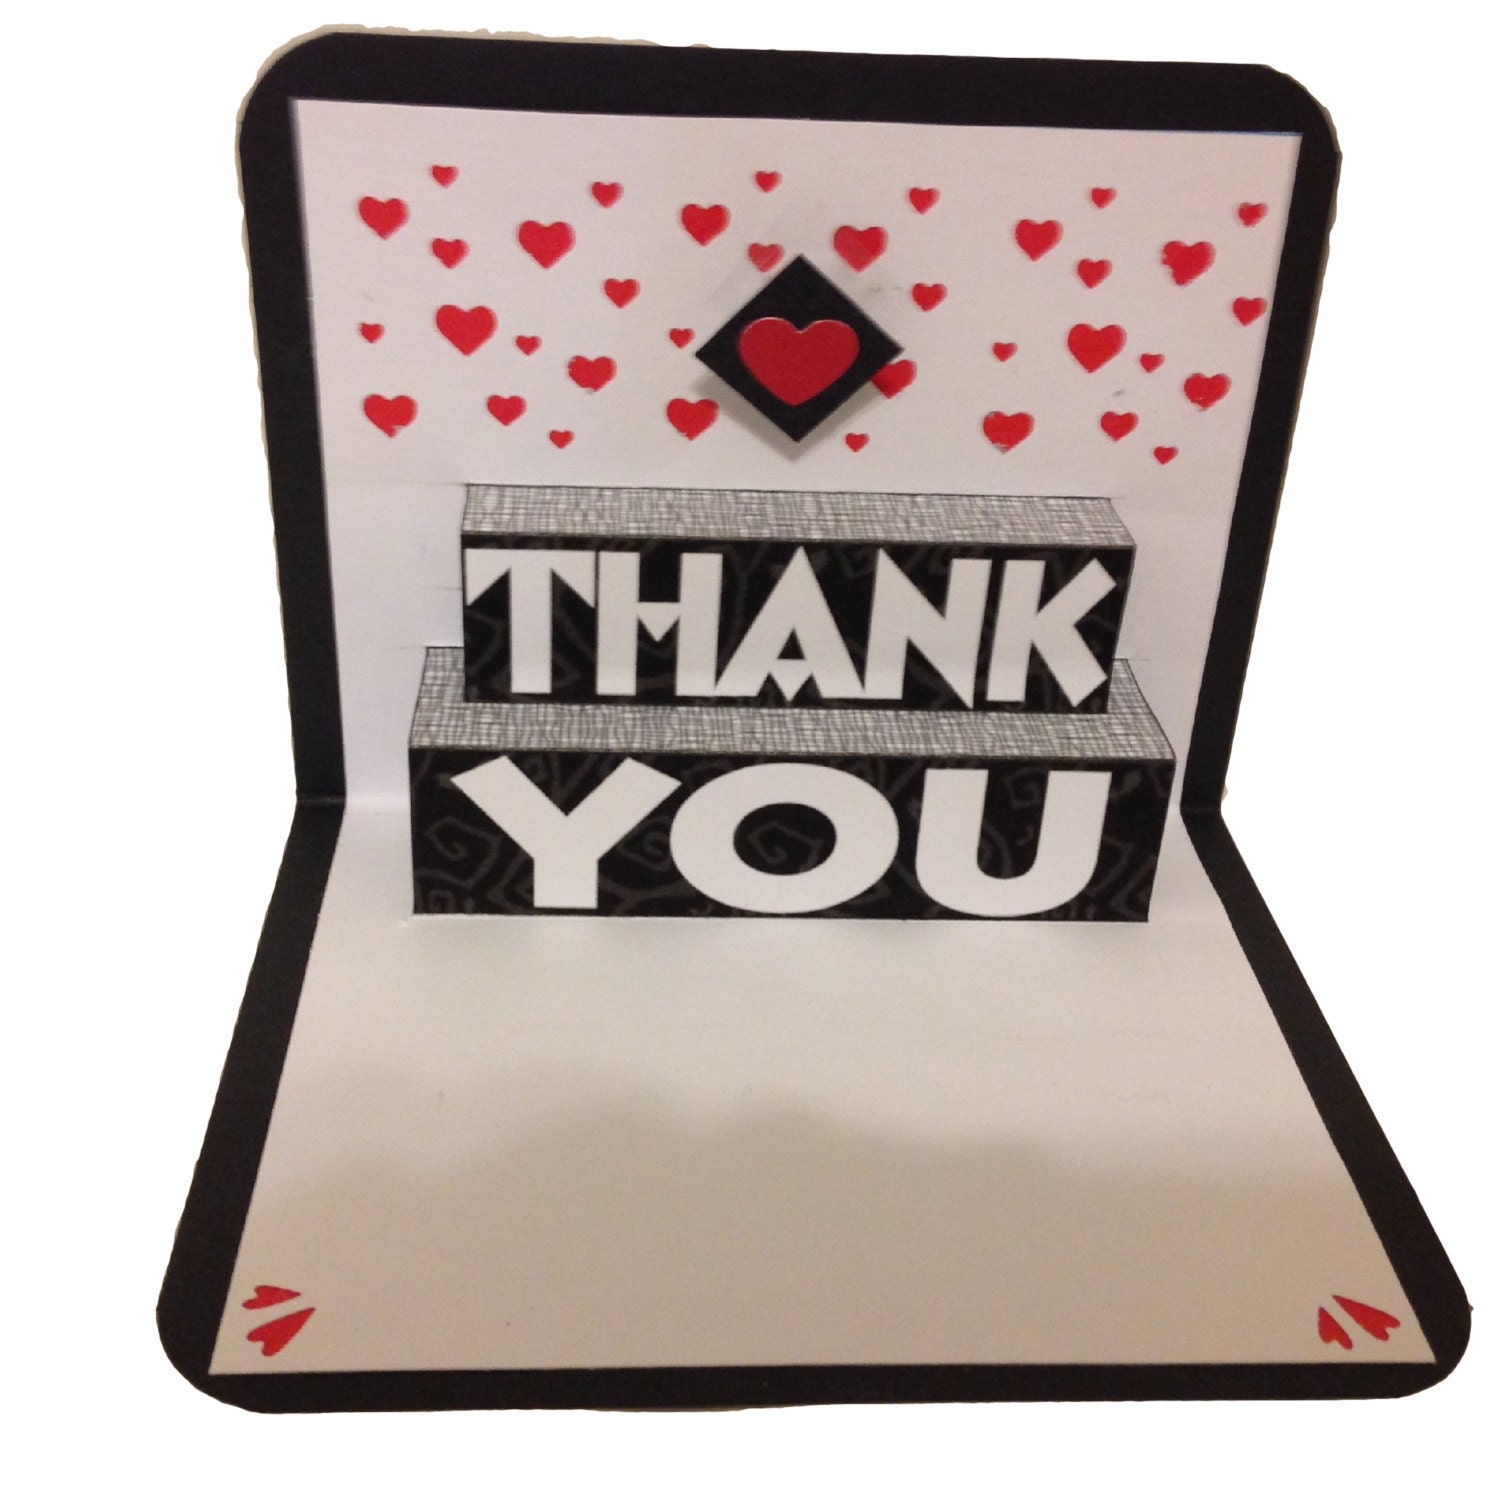 Thank You Pop Up Card with hearts